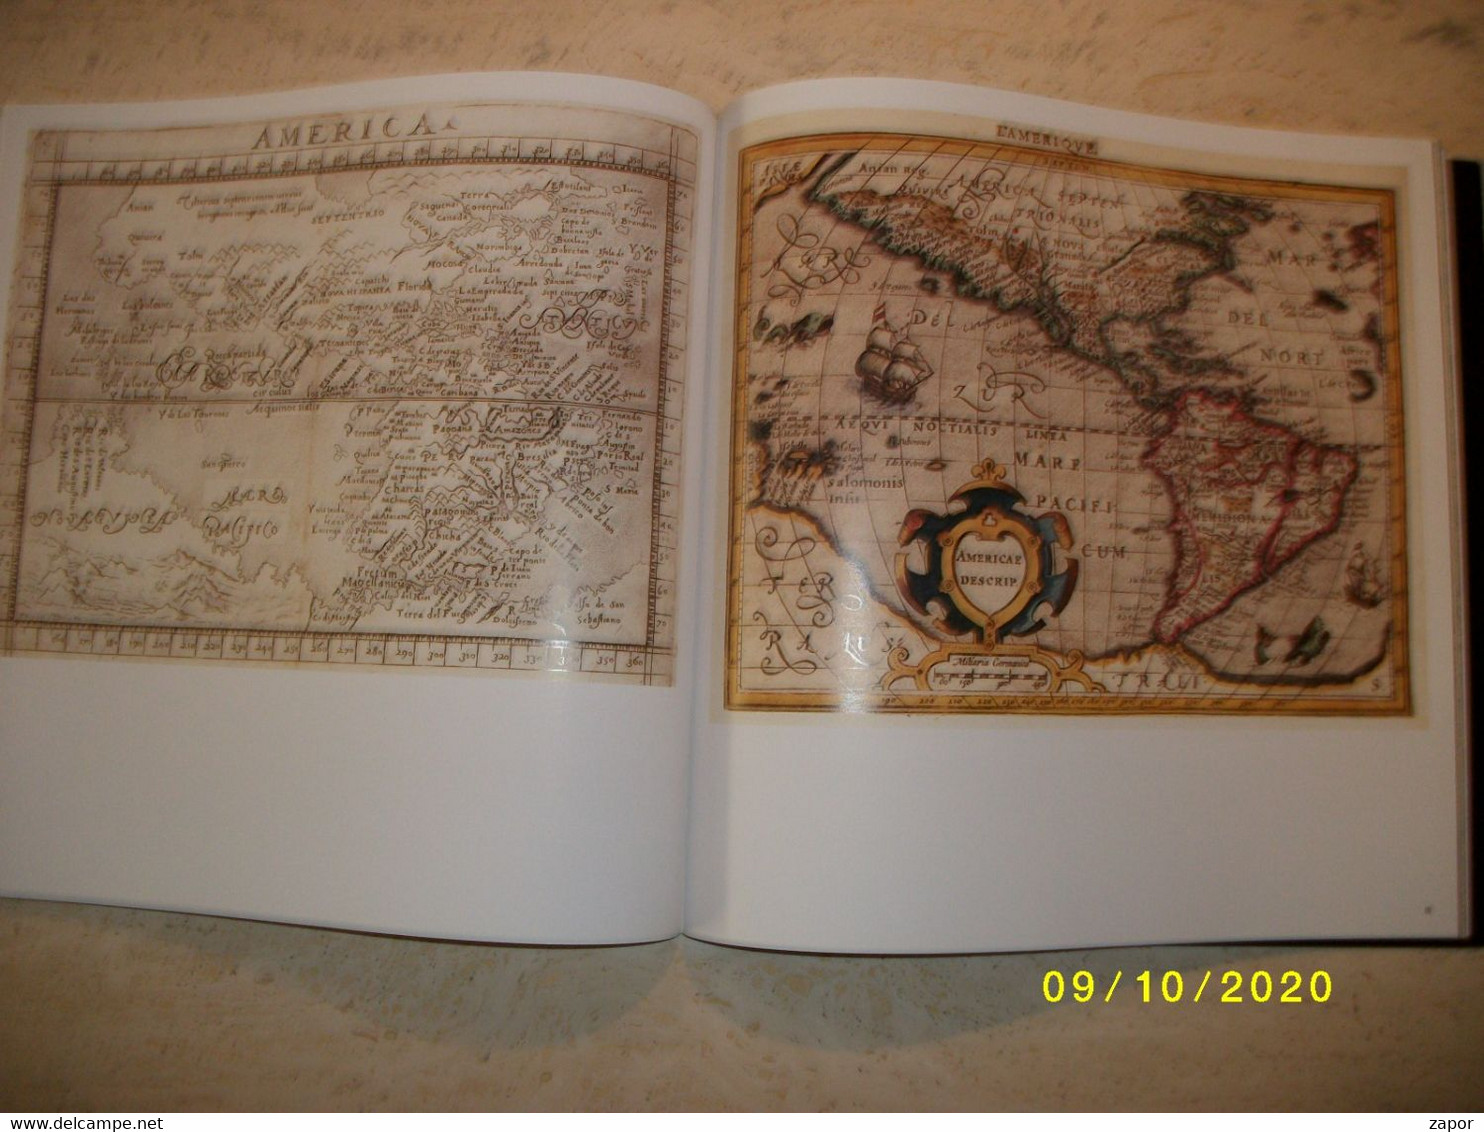 The Agile Rabbit Book Of Historical Cards And Curious Maps - 2005 - Earth Science